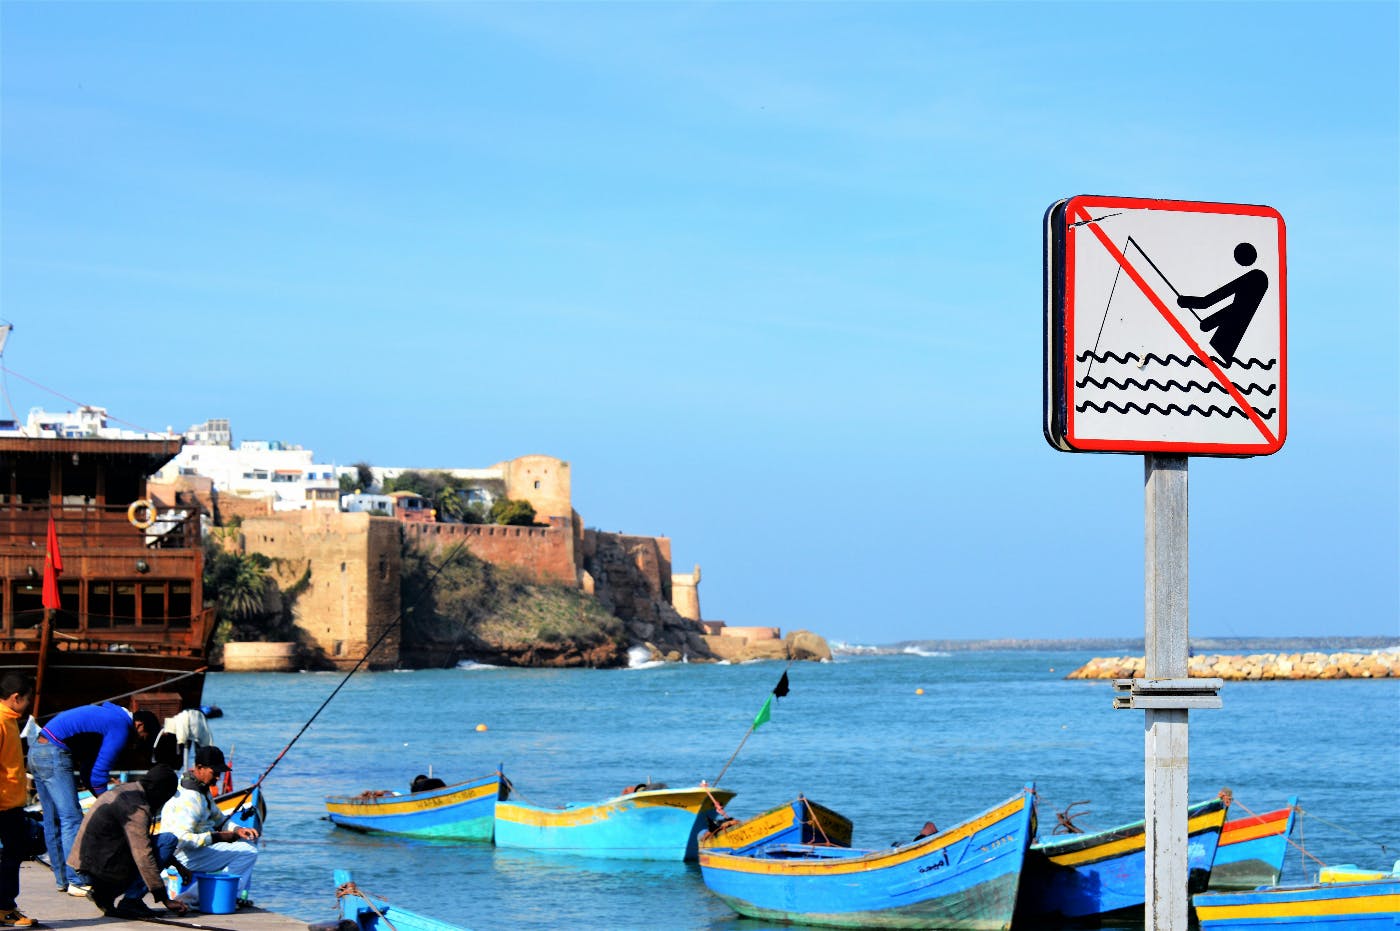 A waterfront with blue boats and several men fishing near a sign with the image of a guy fishing with a line through it.